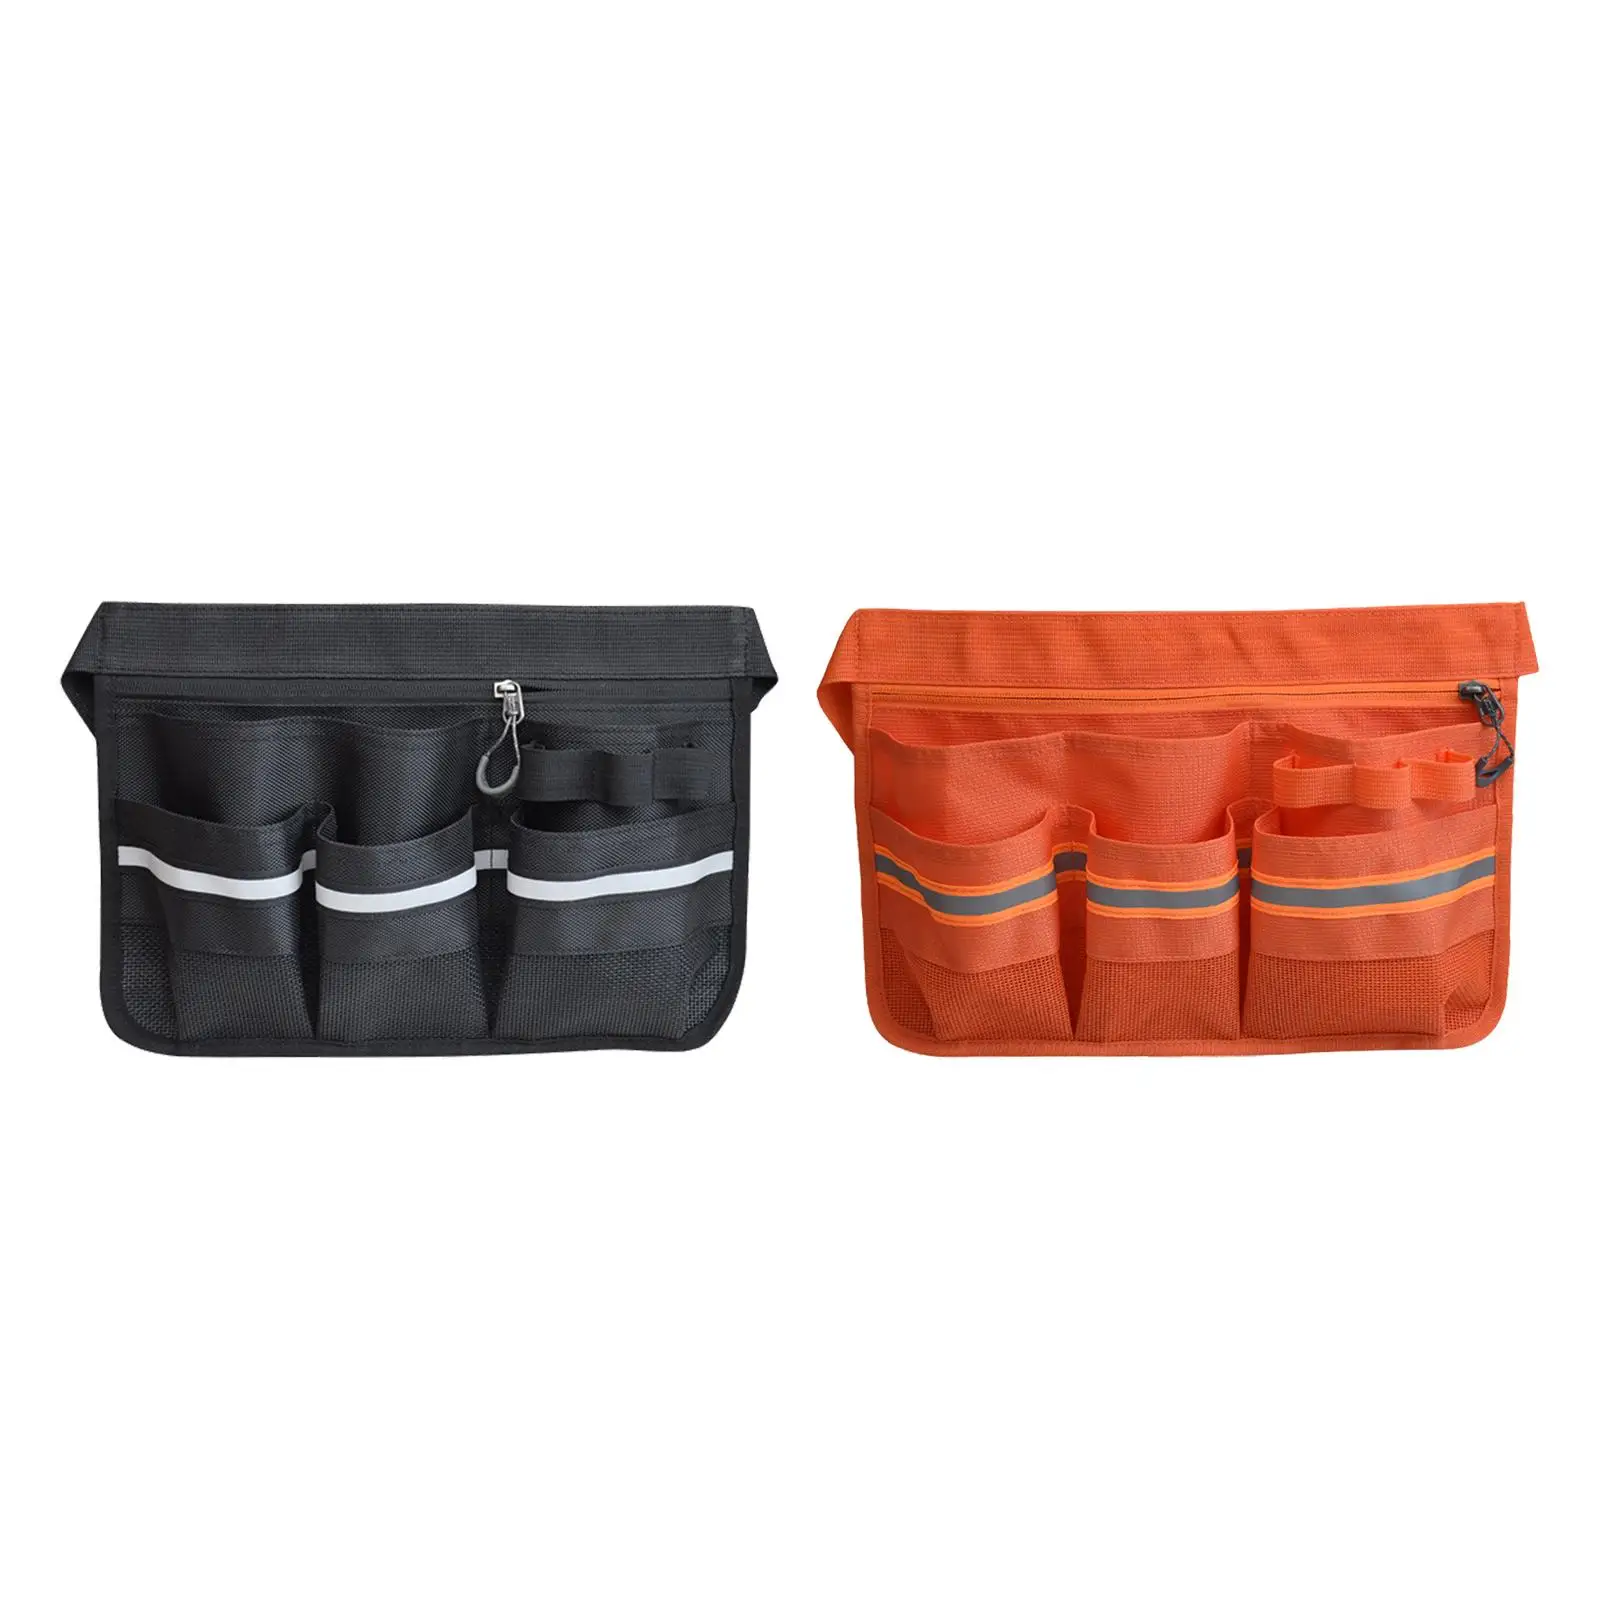 Tool Bag Oxford Cloth with Pockets Waiter Storage for KTV Cleaning Catering